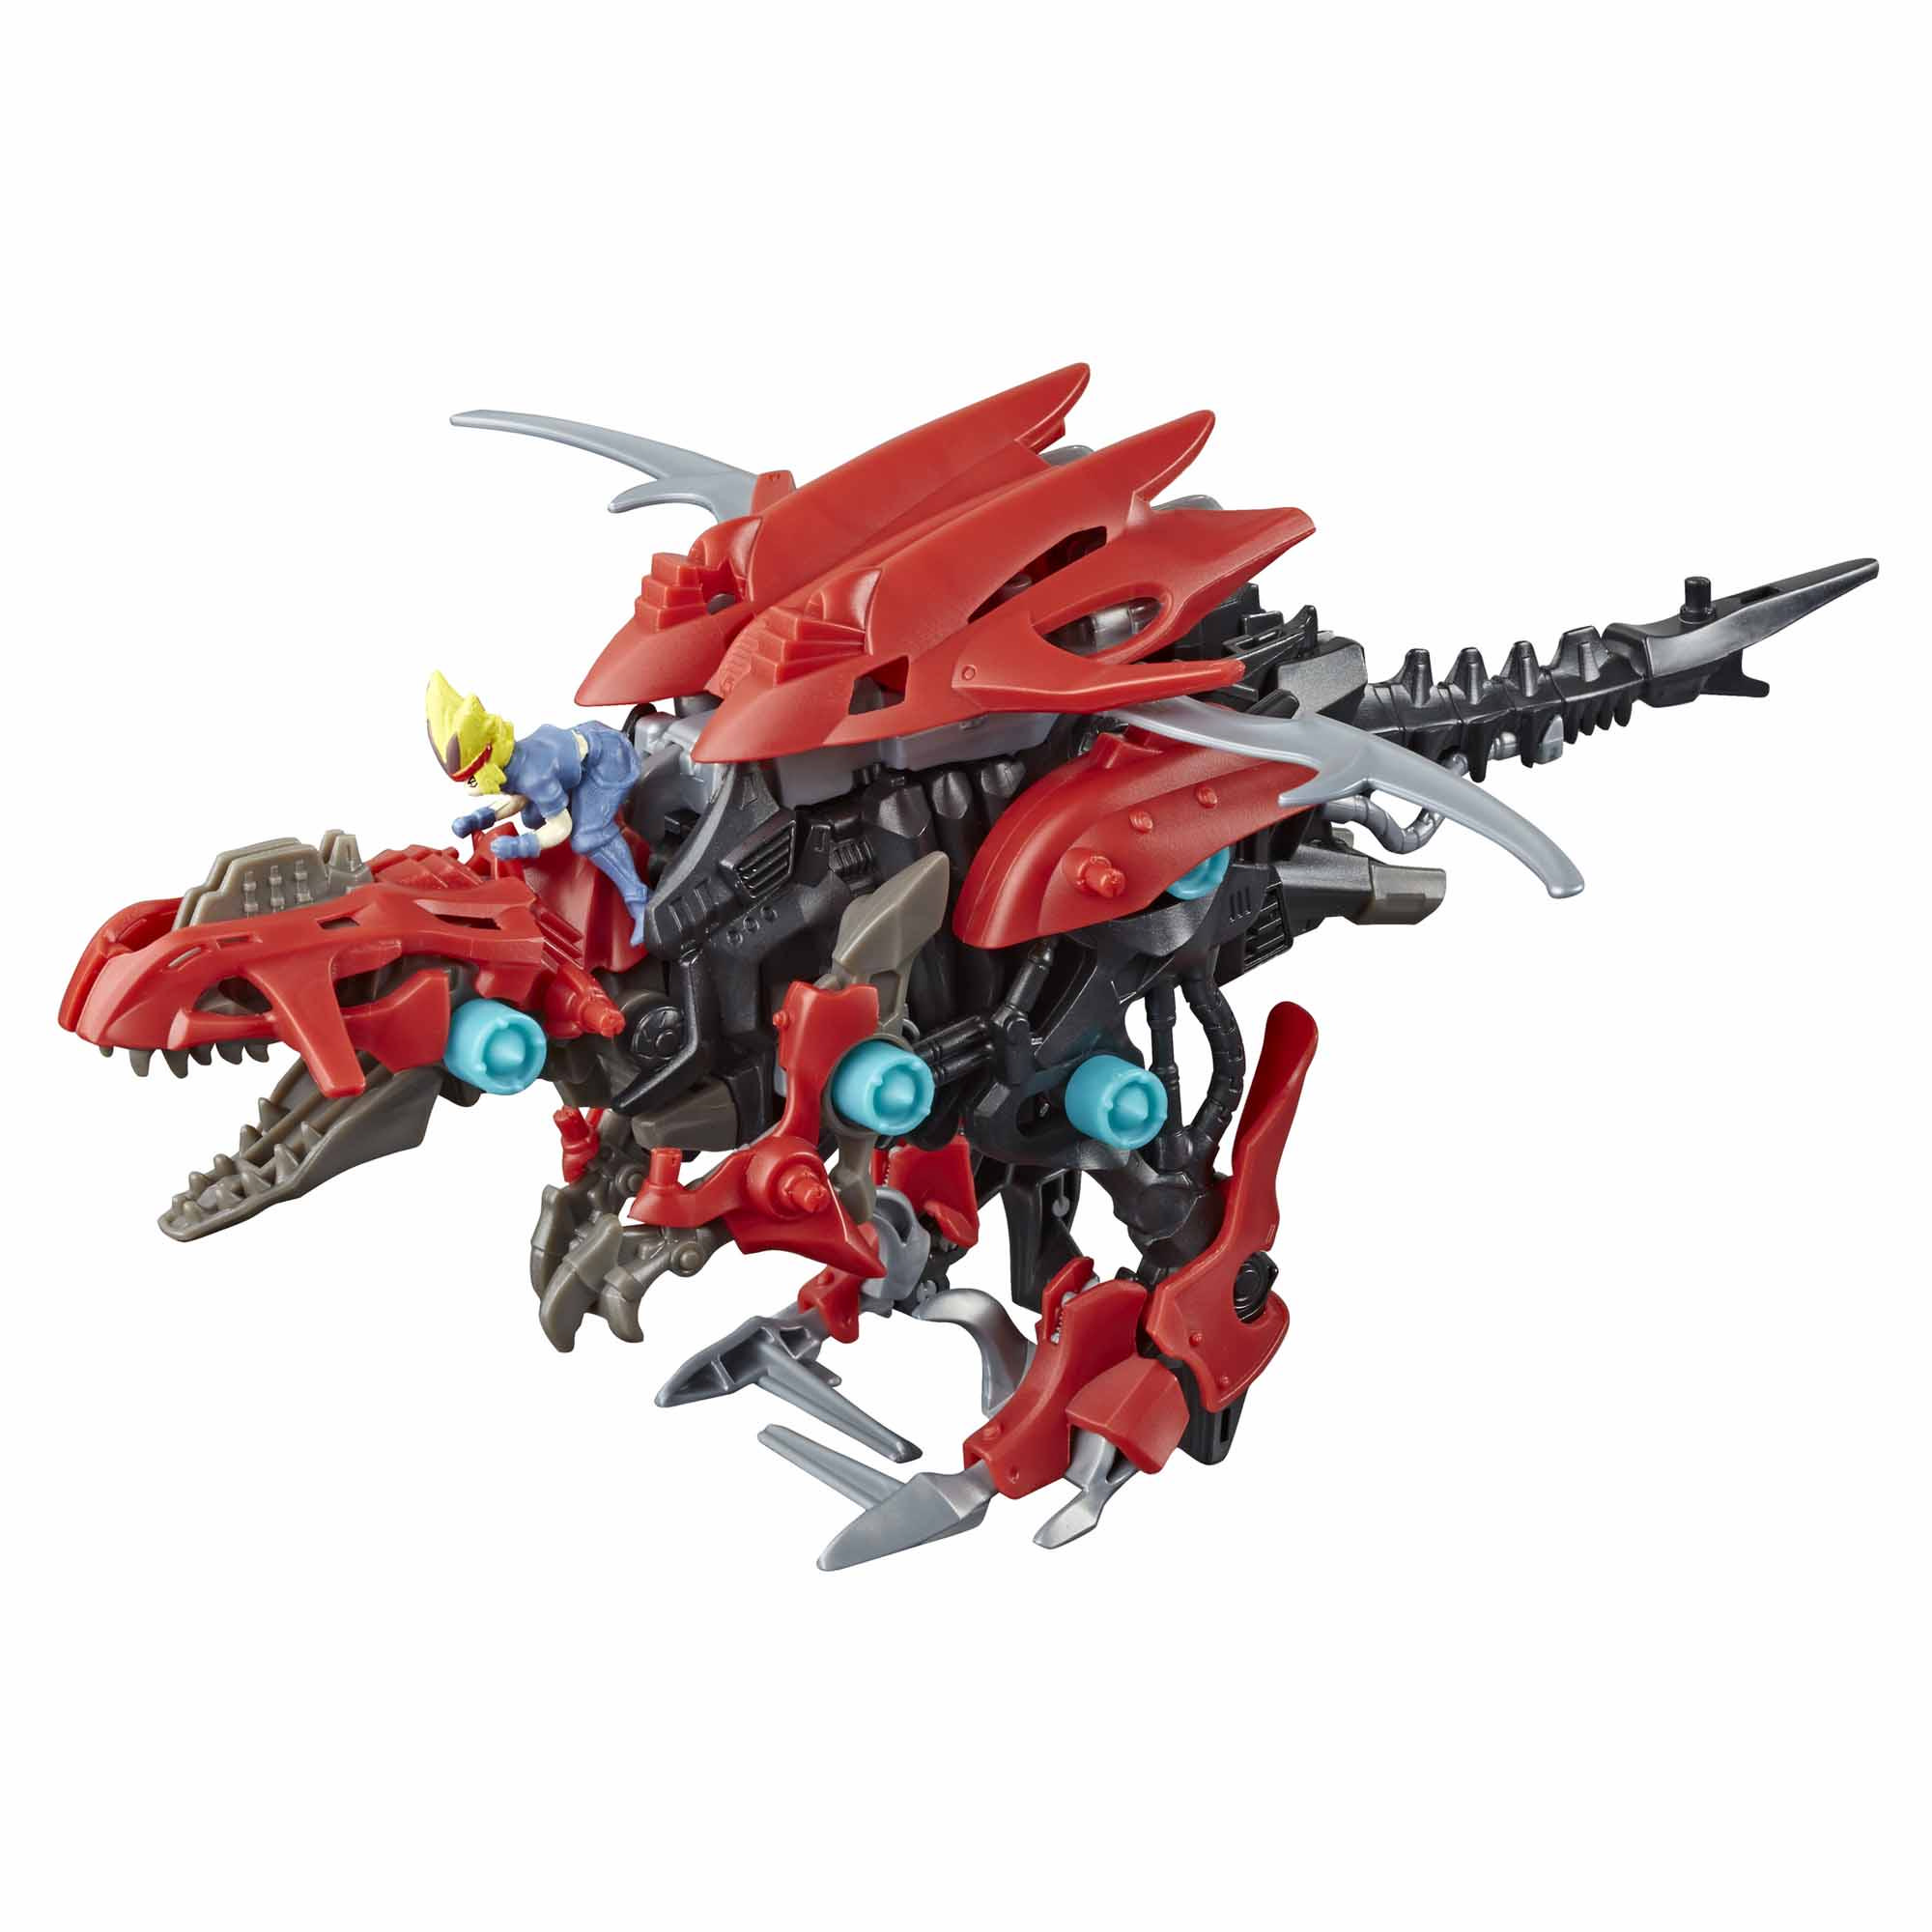 Zoids Mega Battlers Ruin - Deinonychus Raptor -Type Buildable Beast Figure, Motorized Motion - Kids Toys Ages 8 and Up, 45 Pieces